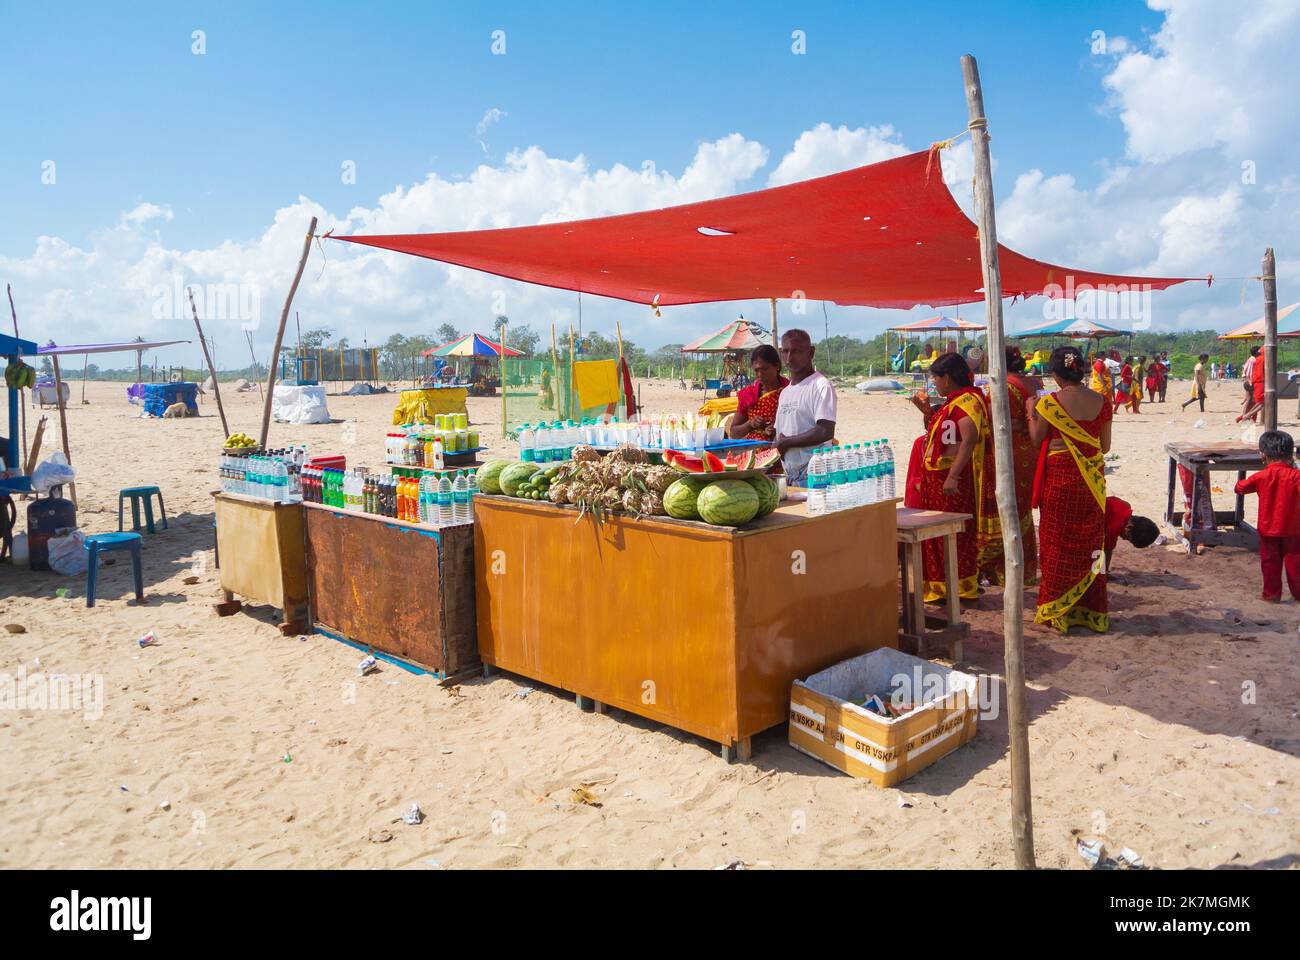 Mahabalipuram, Tamil nadu, South India, 2nd of January 2020: A stand with refreshments and watermelons Stock Photo